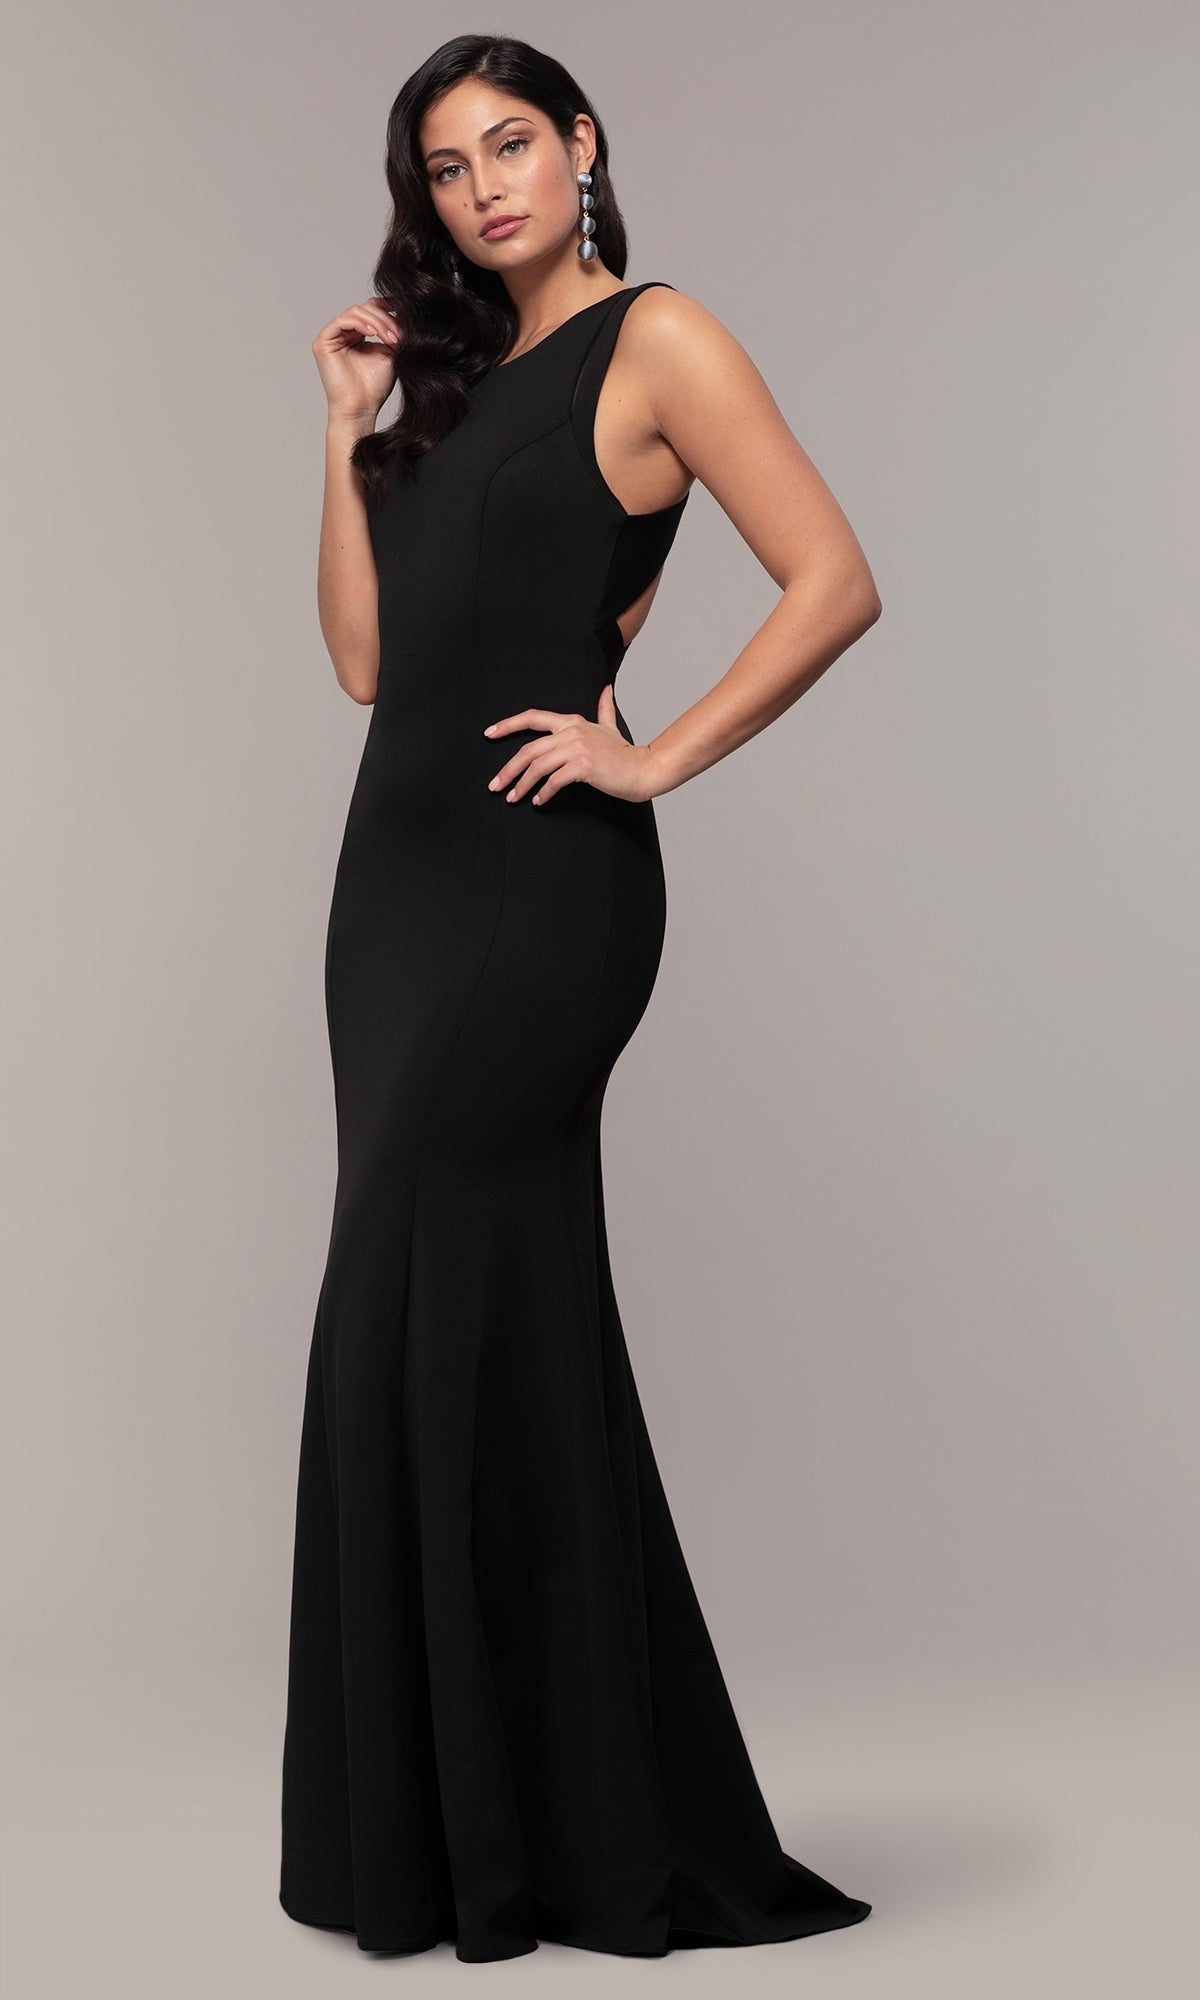 Strappy-Back Simple Long Formal Prom Dress - PromGirl